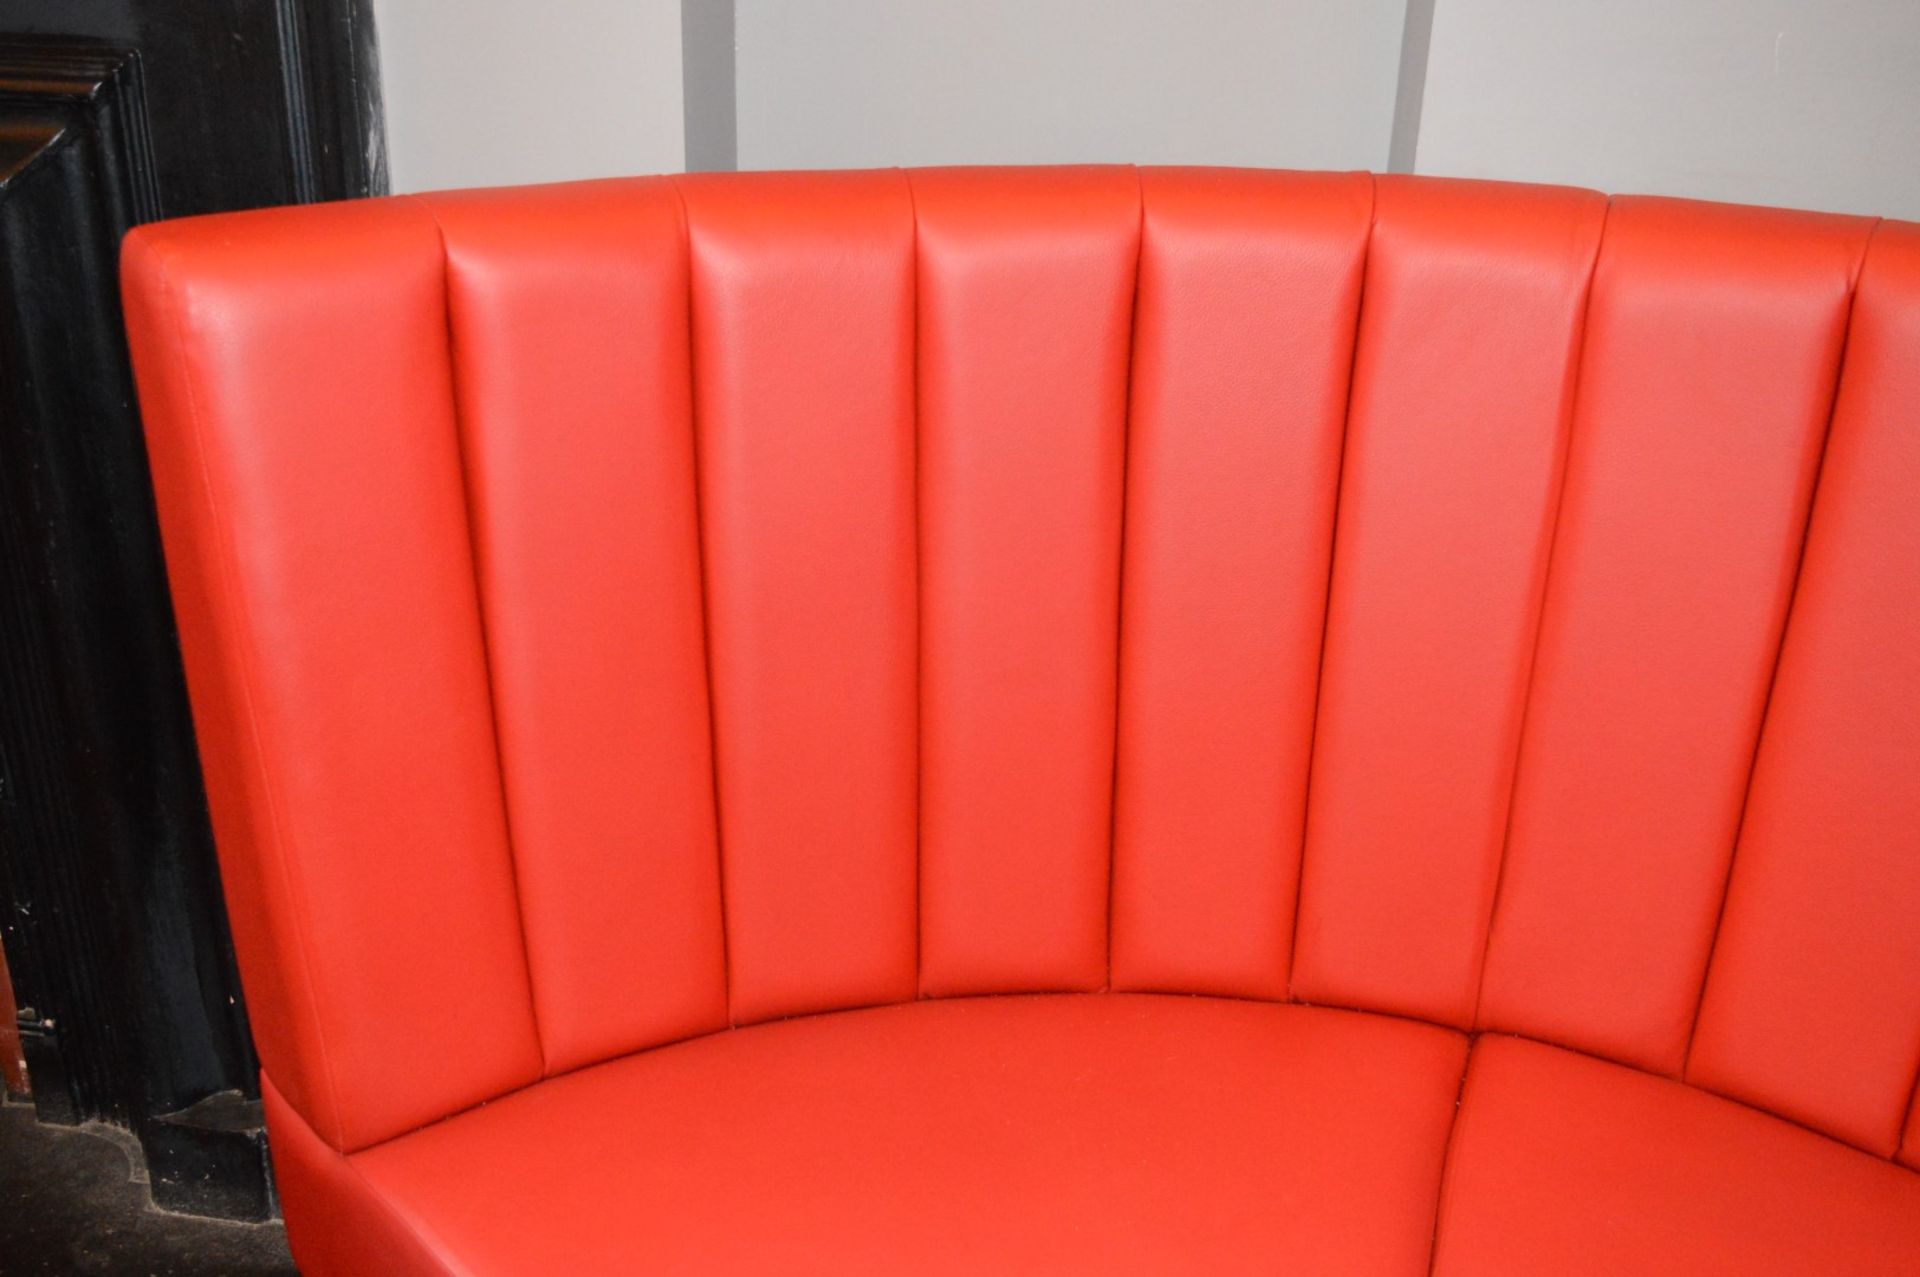 1 x Curved C-Shaped Seating Booth Upholstered In A Bright Red Leather - CL353 - Image 7 of 11